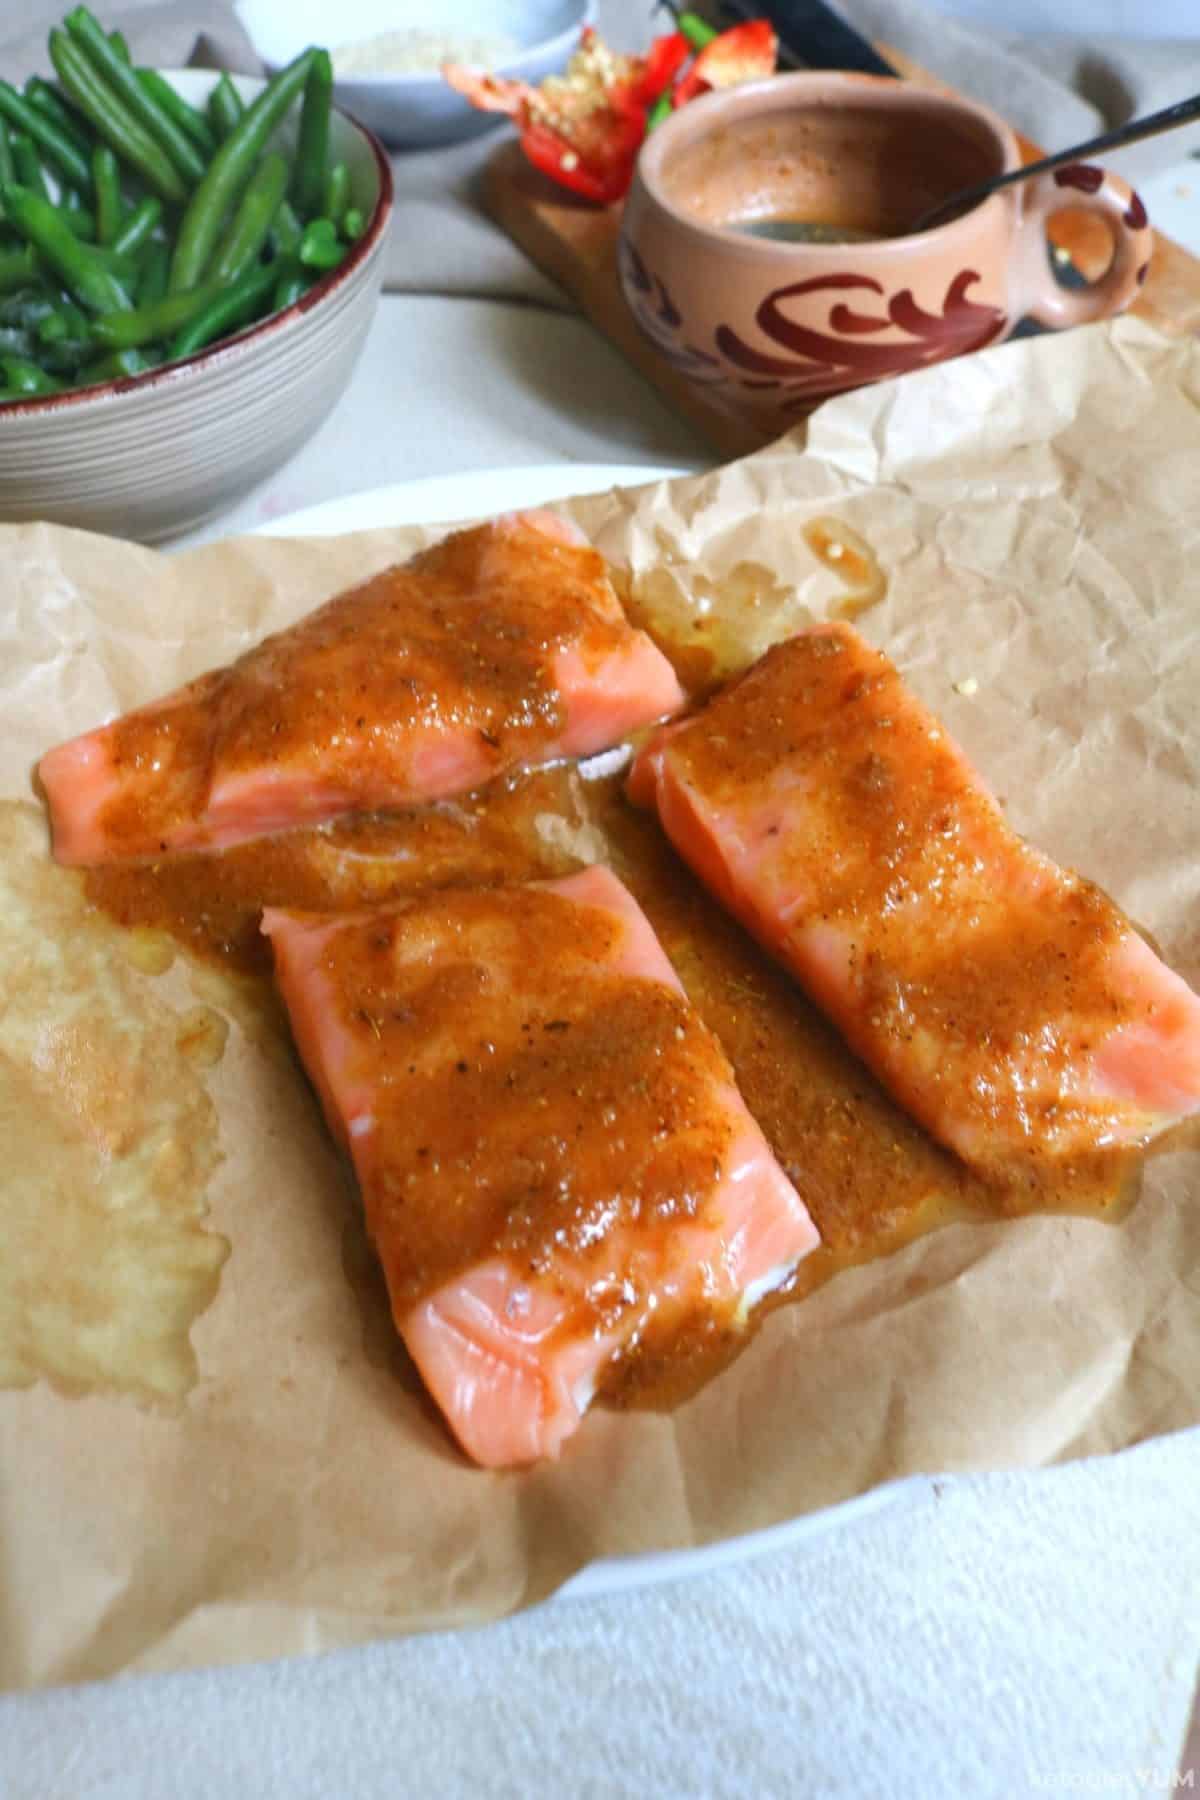 Brush the salmon fillets generously with the glaze